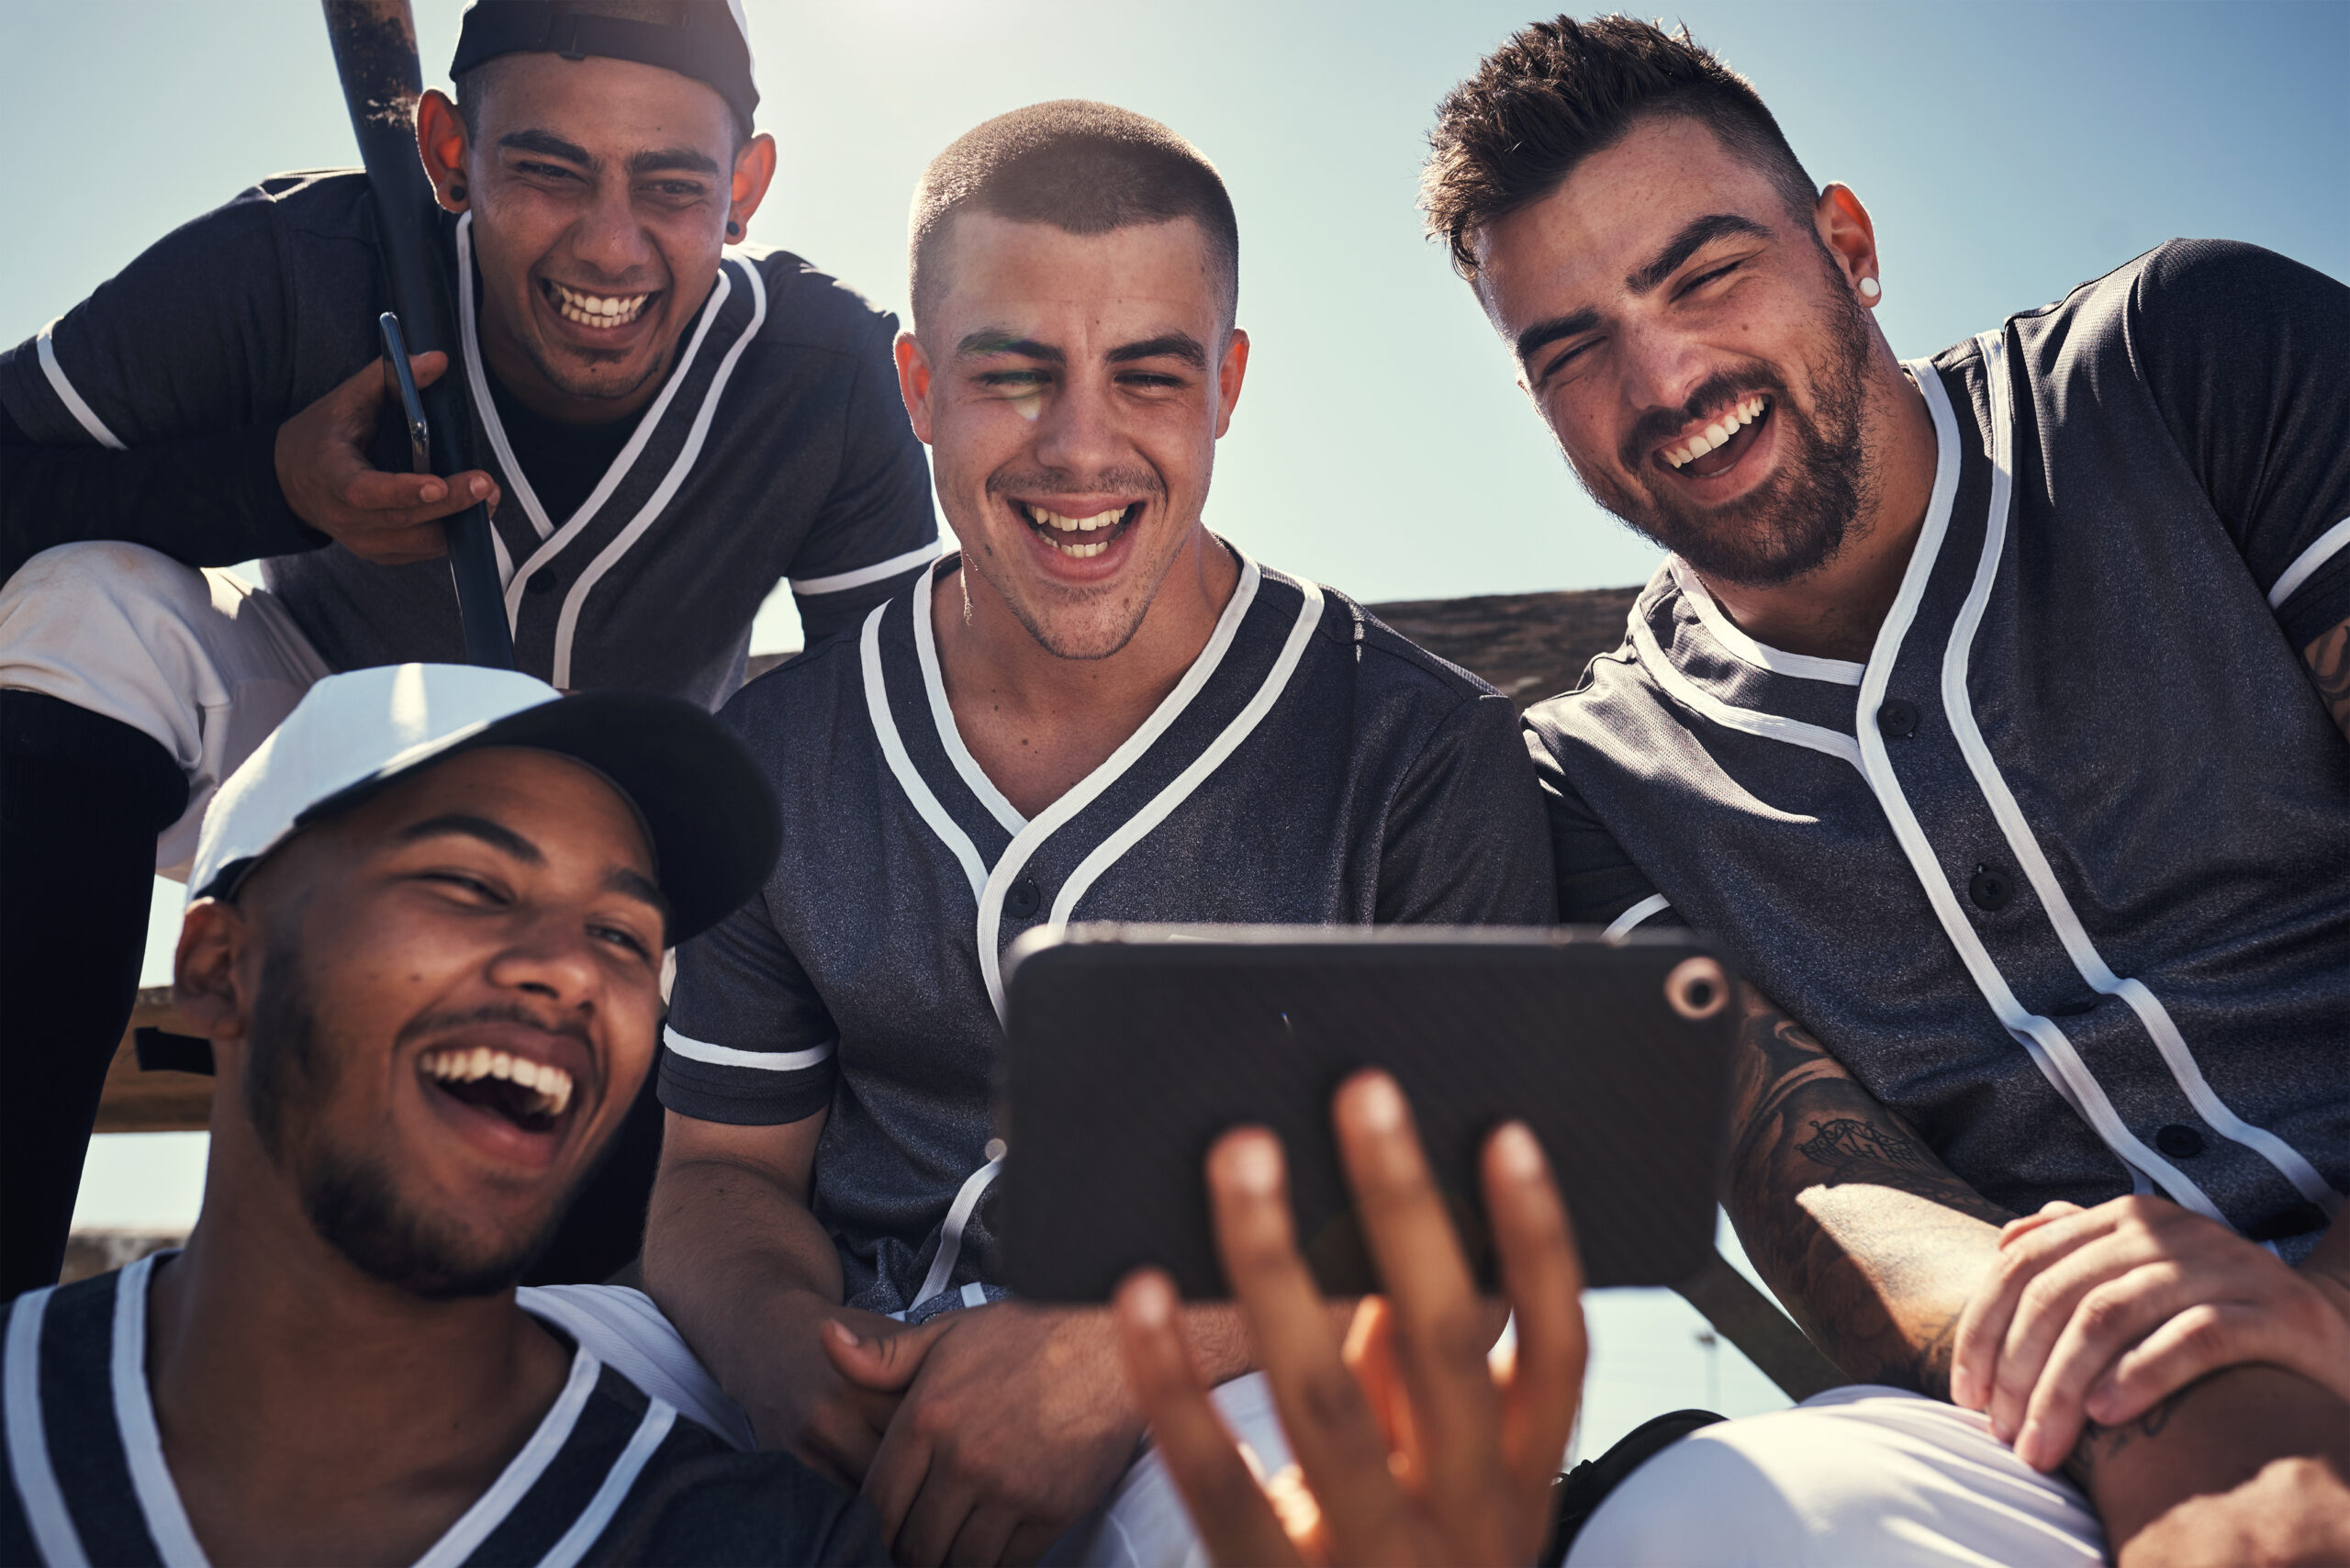 Shot of a group of young men using a smartphone after playing a baseball game.